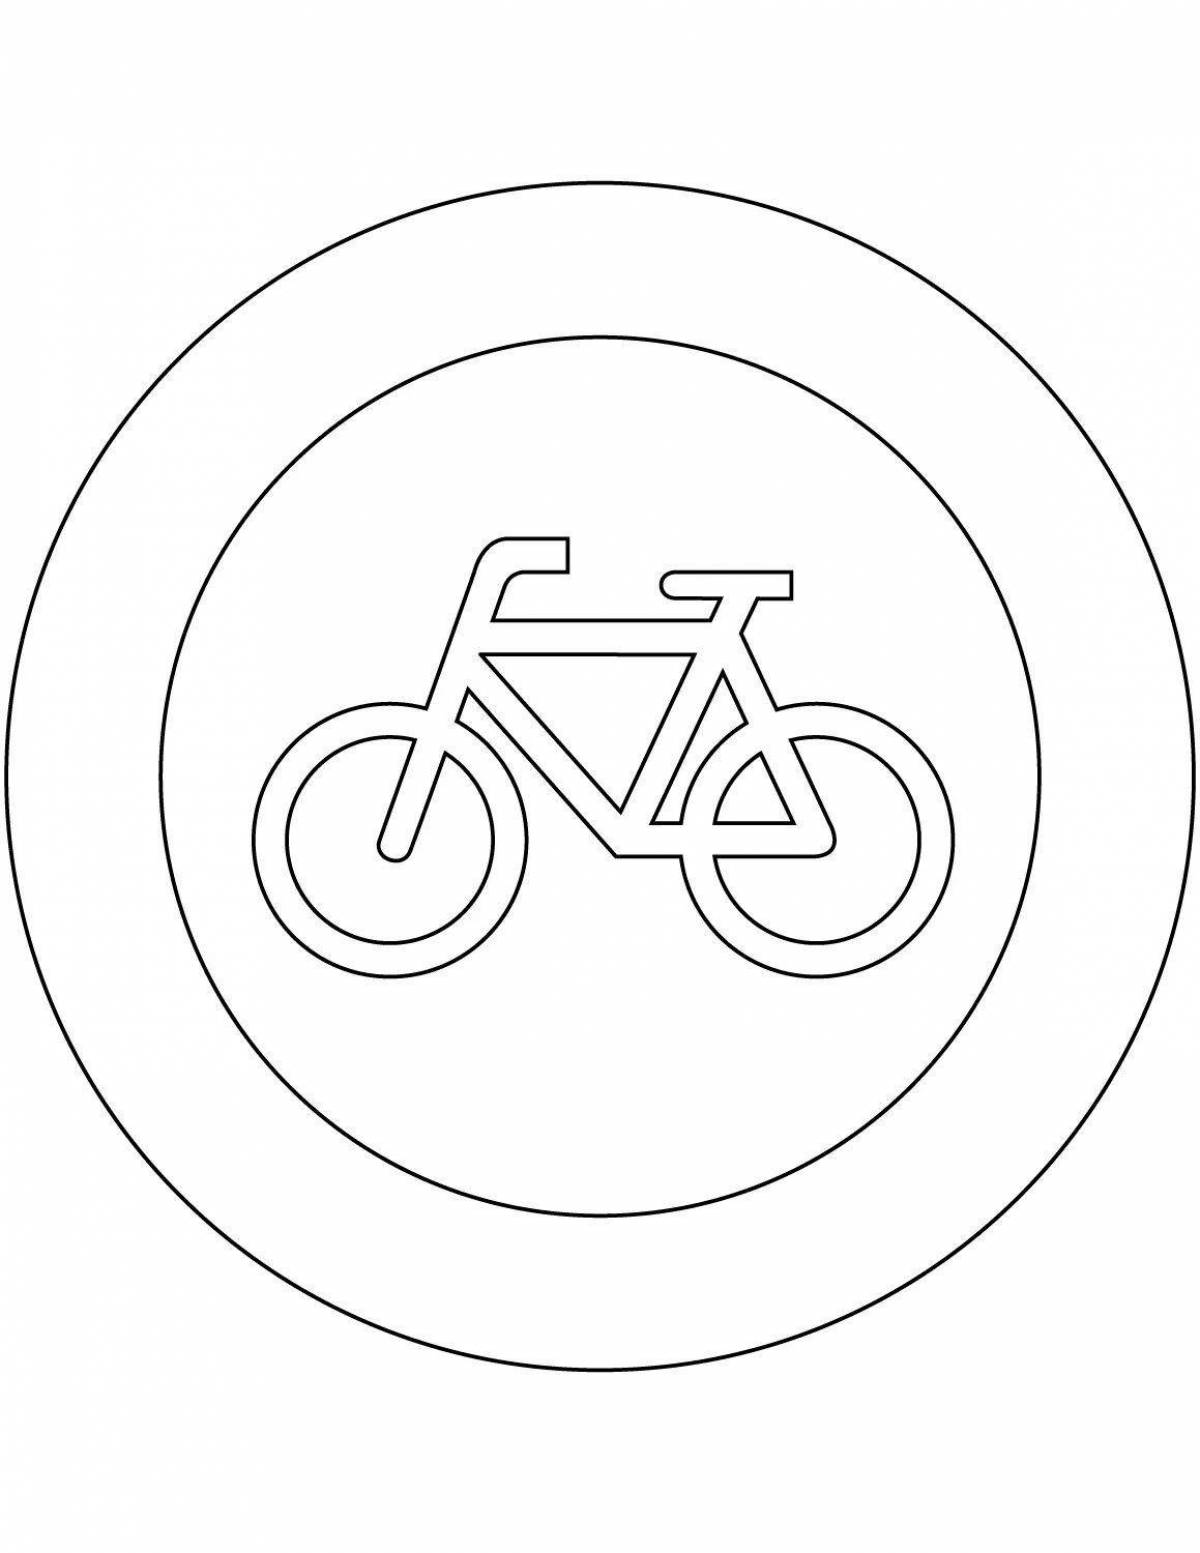 Colorful no bike coloring page